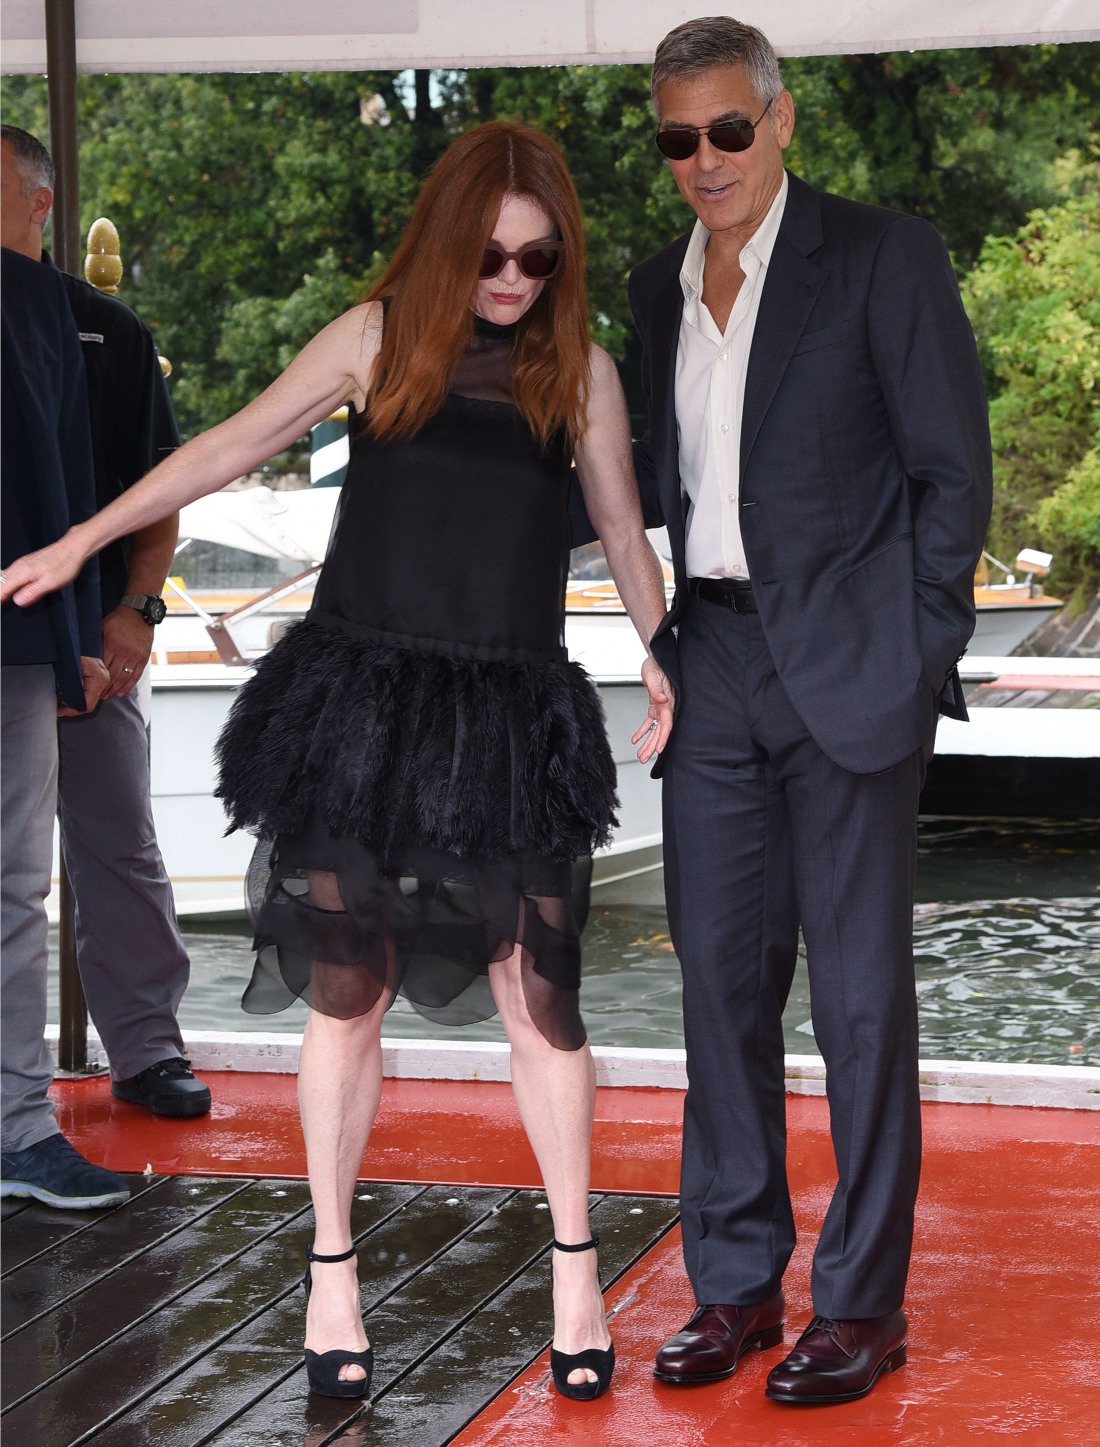 74th Venice Film Festival - Celebrity Sightings - Day 4 Featuring: Julianne Moore, George Clooney Where: Venice, Italy When: 01 Sep 2017 Credit: KIKA/WENN.com **Only available for publication in UK, Germany, Austria, Switzerland, USA**